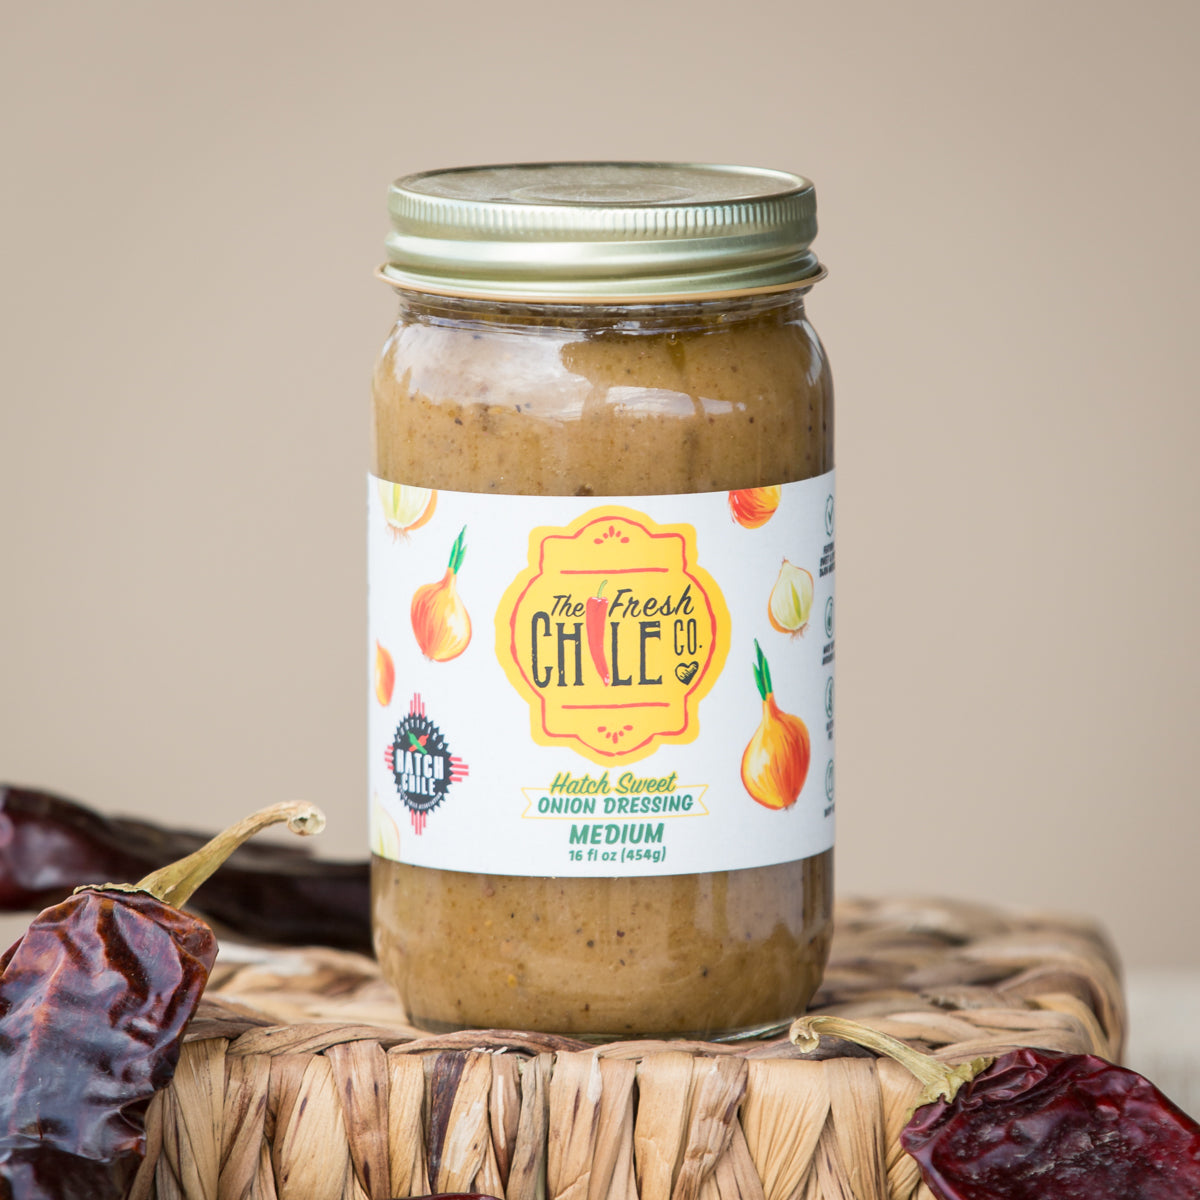 A jar of Hatch Sweet Onion Dressing by The Fresh Chile Co., labeled "medium," placed on a woven basket, surrounded by dried red chili peppers, against a beige backdrop.